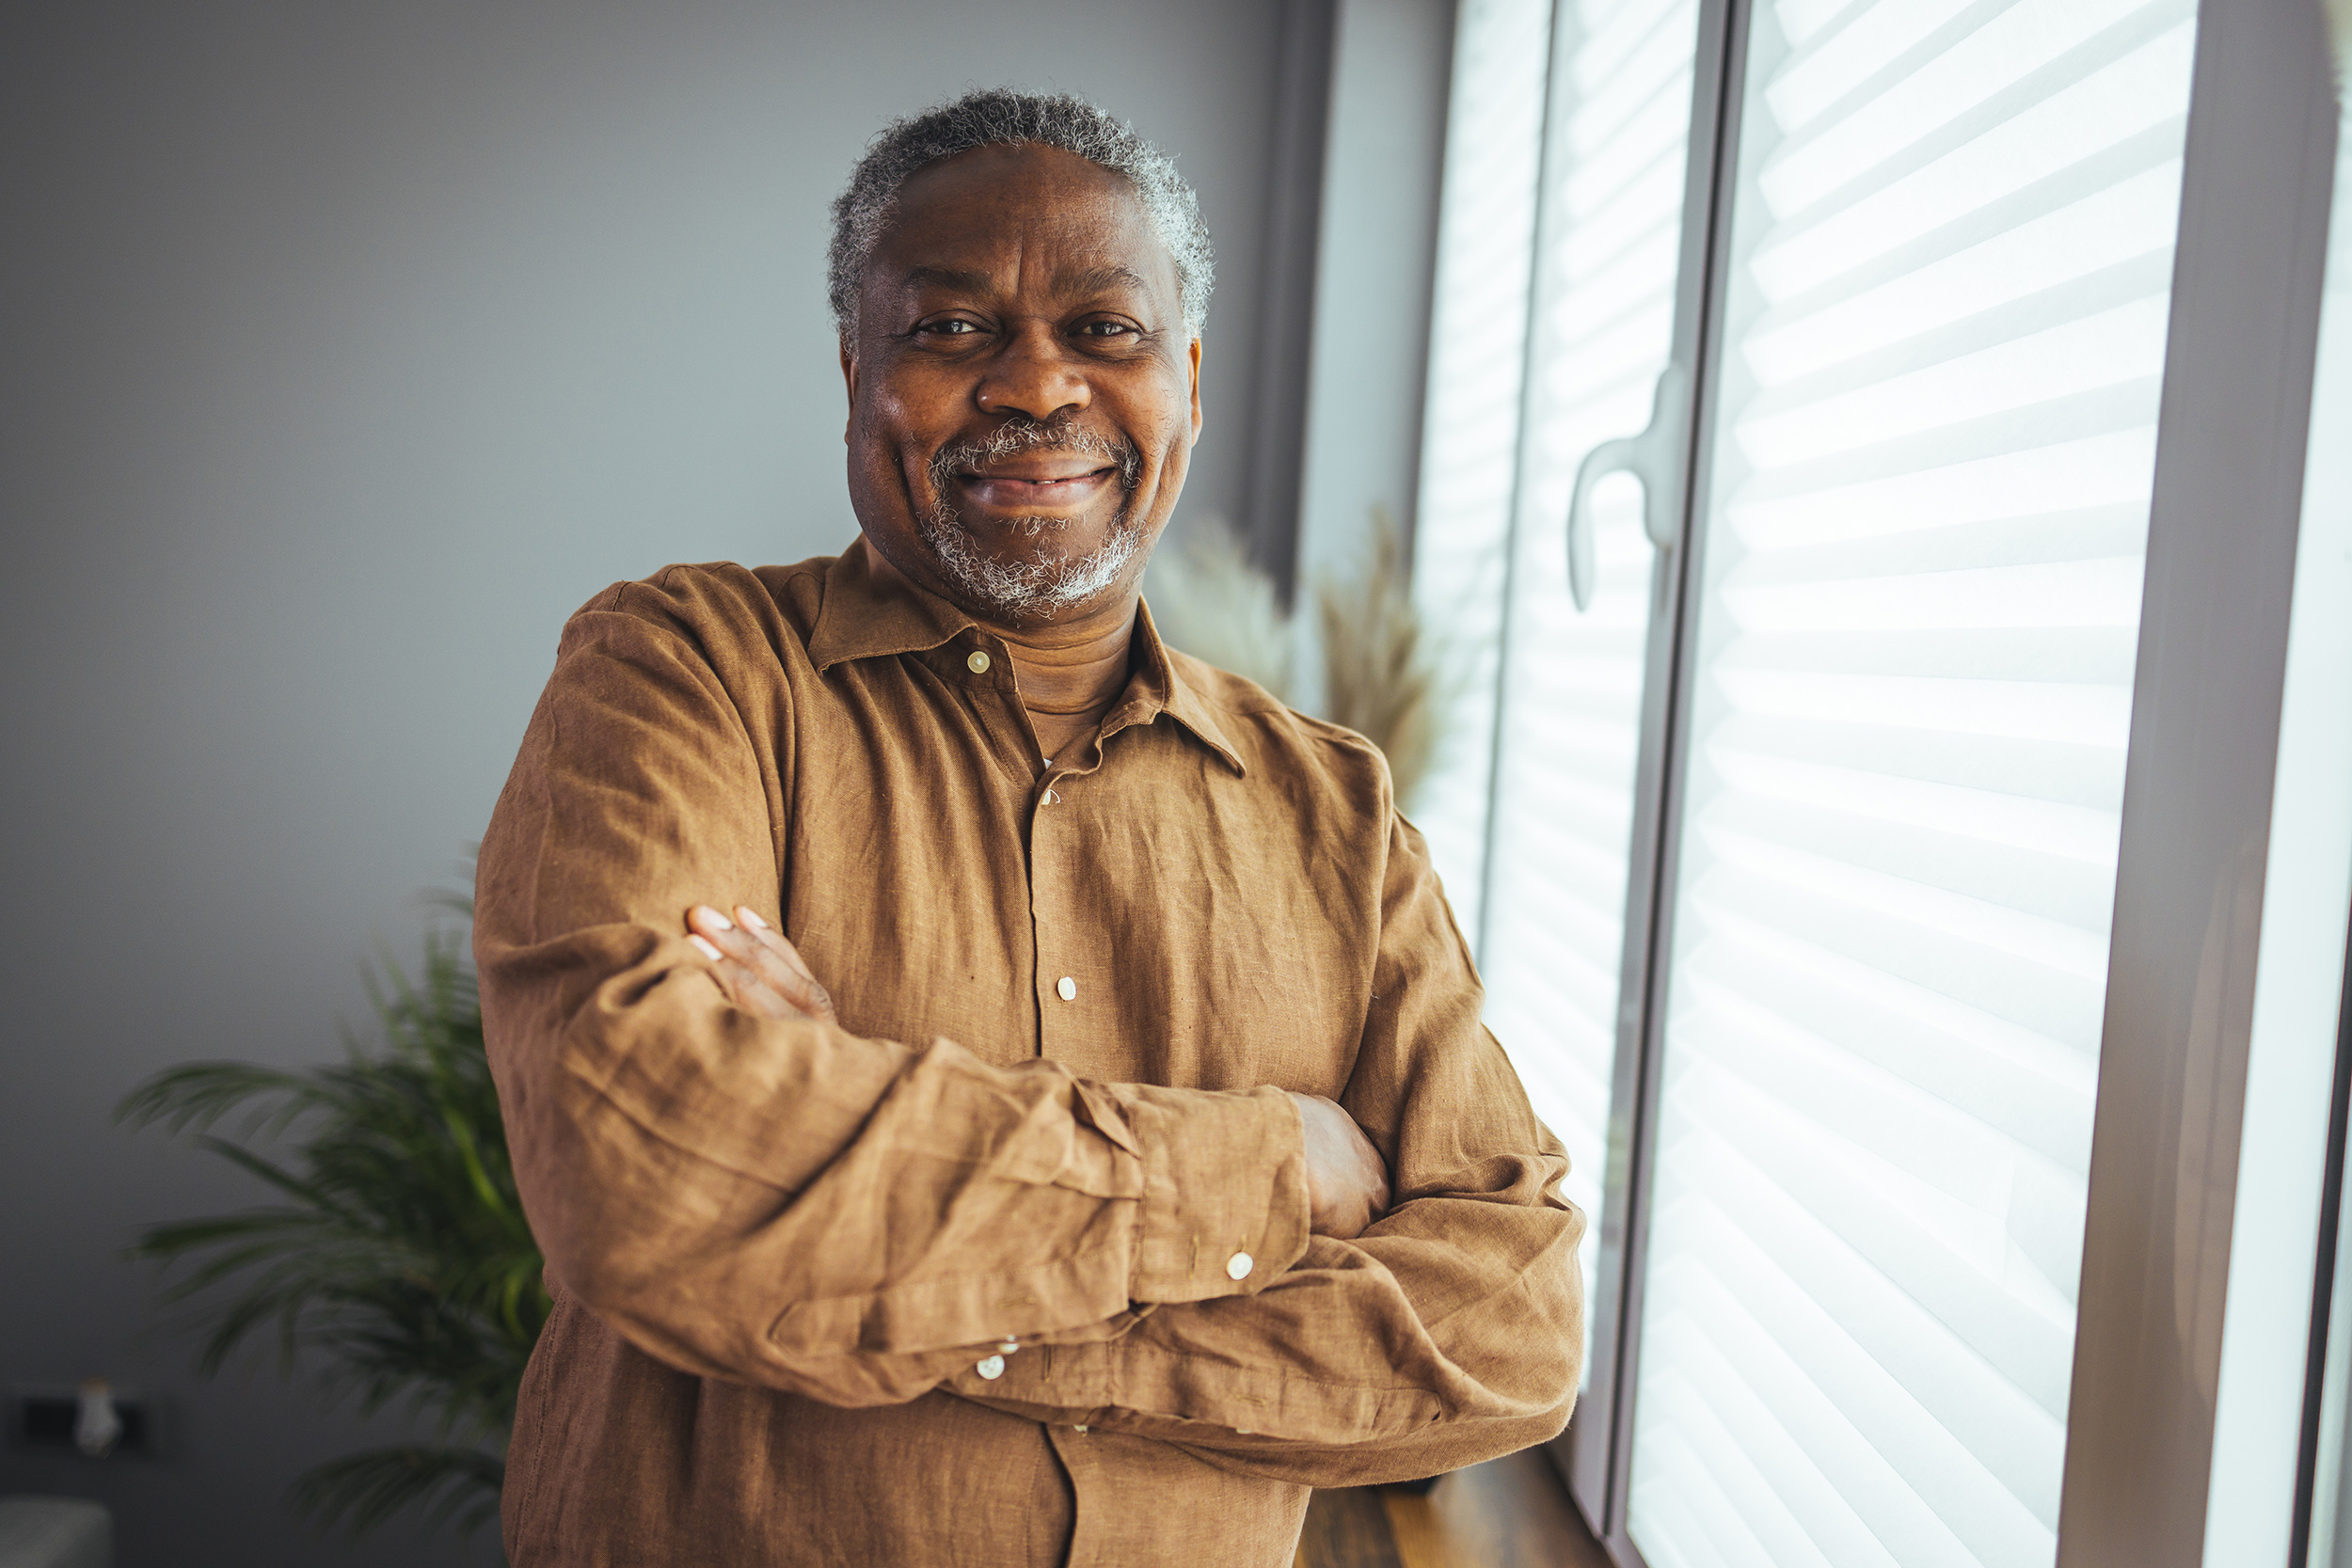 Standing next to a window, a man crosses his arms and grins. With help from Troutman & Troutman's Oklahoma disability lawyers, people in Owasso can get monthly financial assistance and Medicare eligibility.